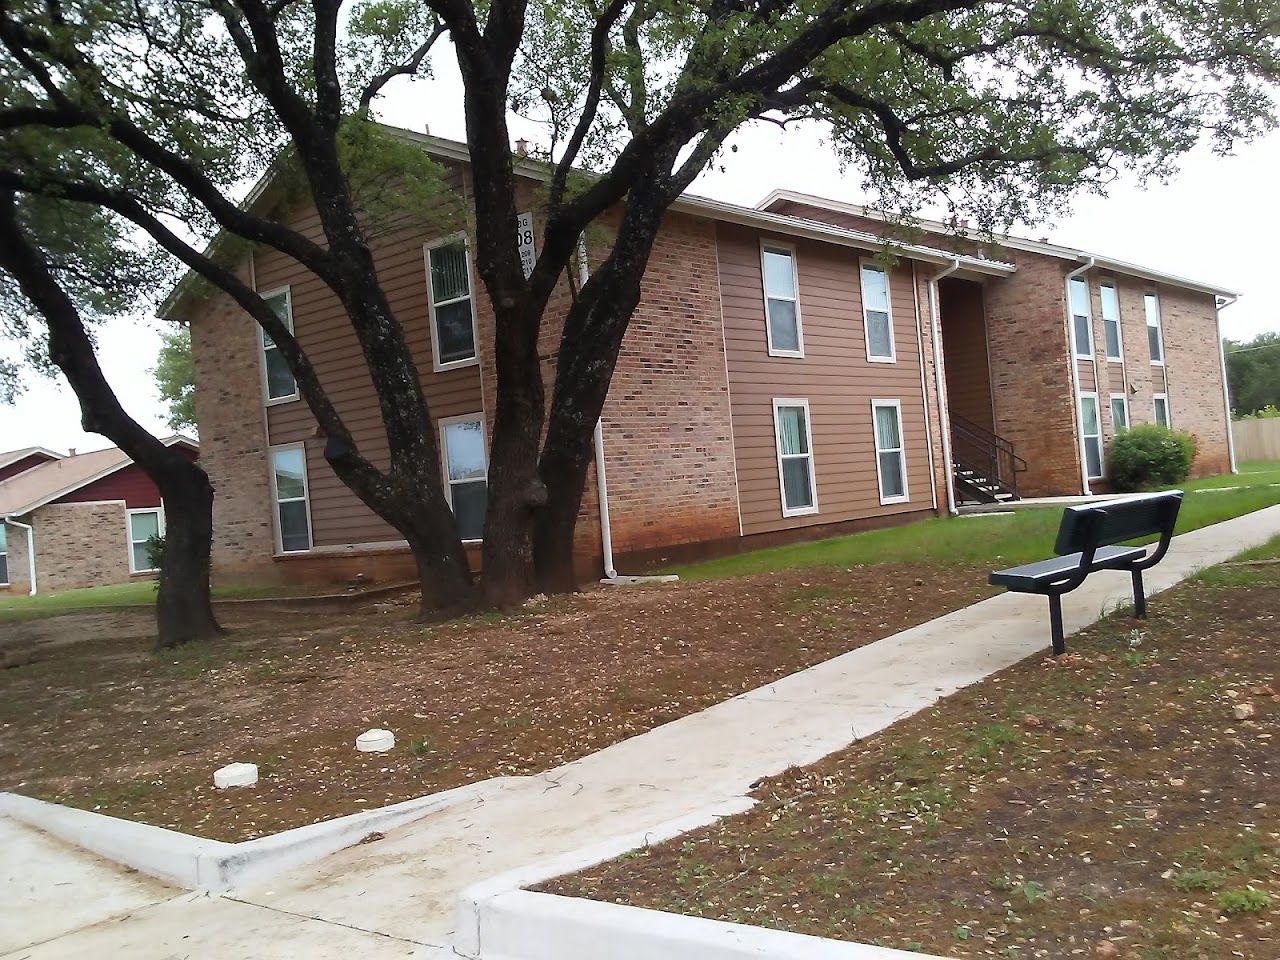 Photo of GEORGETOWN SQUARE APARTMENTS. Affordable housing located at 206 ROYAL DR. GEORGETOWN, TX 78626